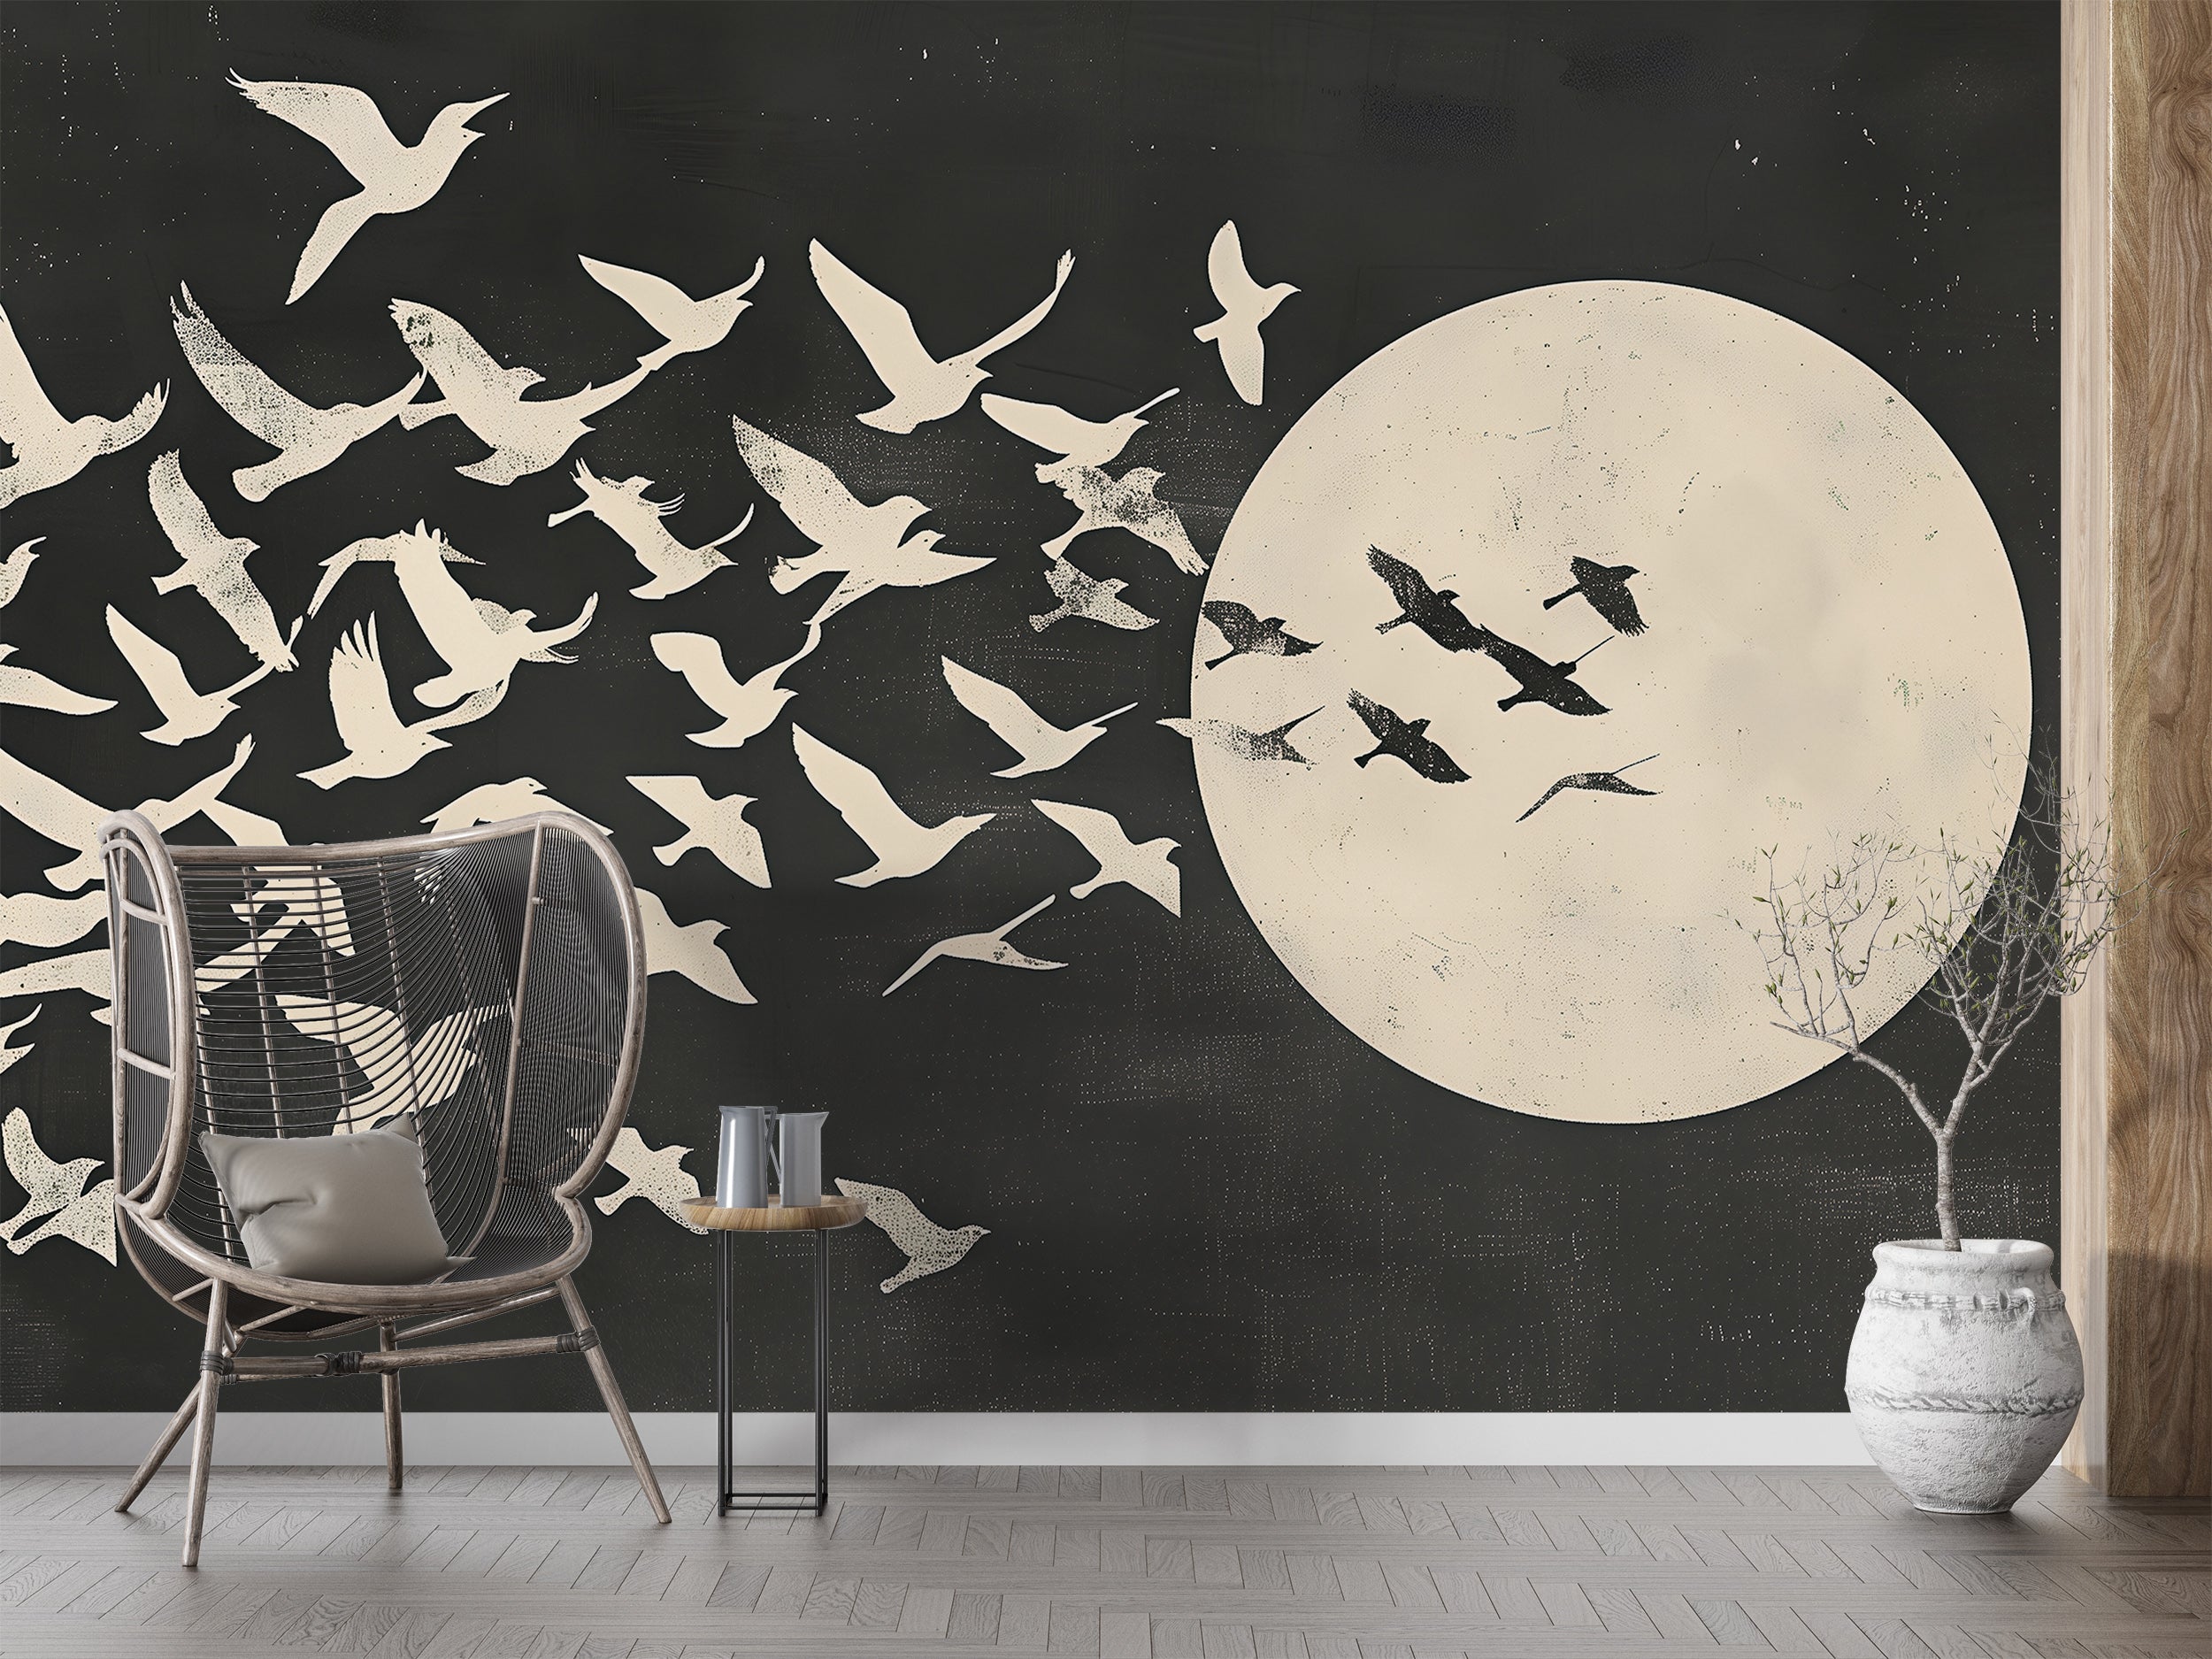 Abstract Birds Swallow Mural, Black and White Abstract Wallpaper, Peel and Stick Japanese Birds and Sun Art, Removable Two-Color Decor